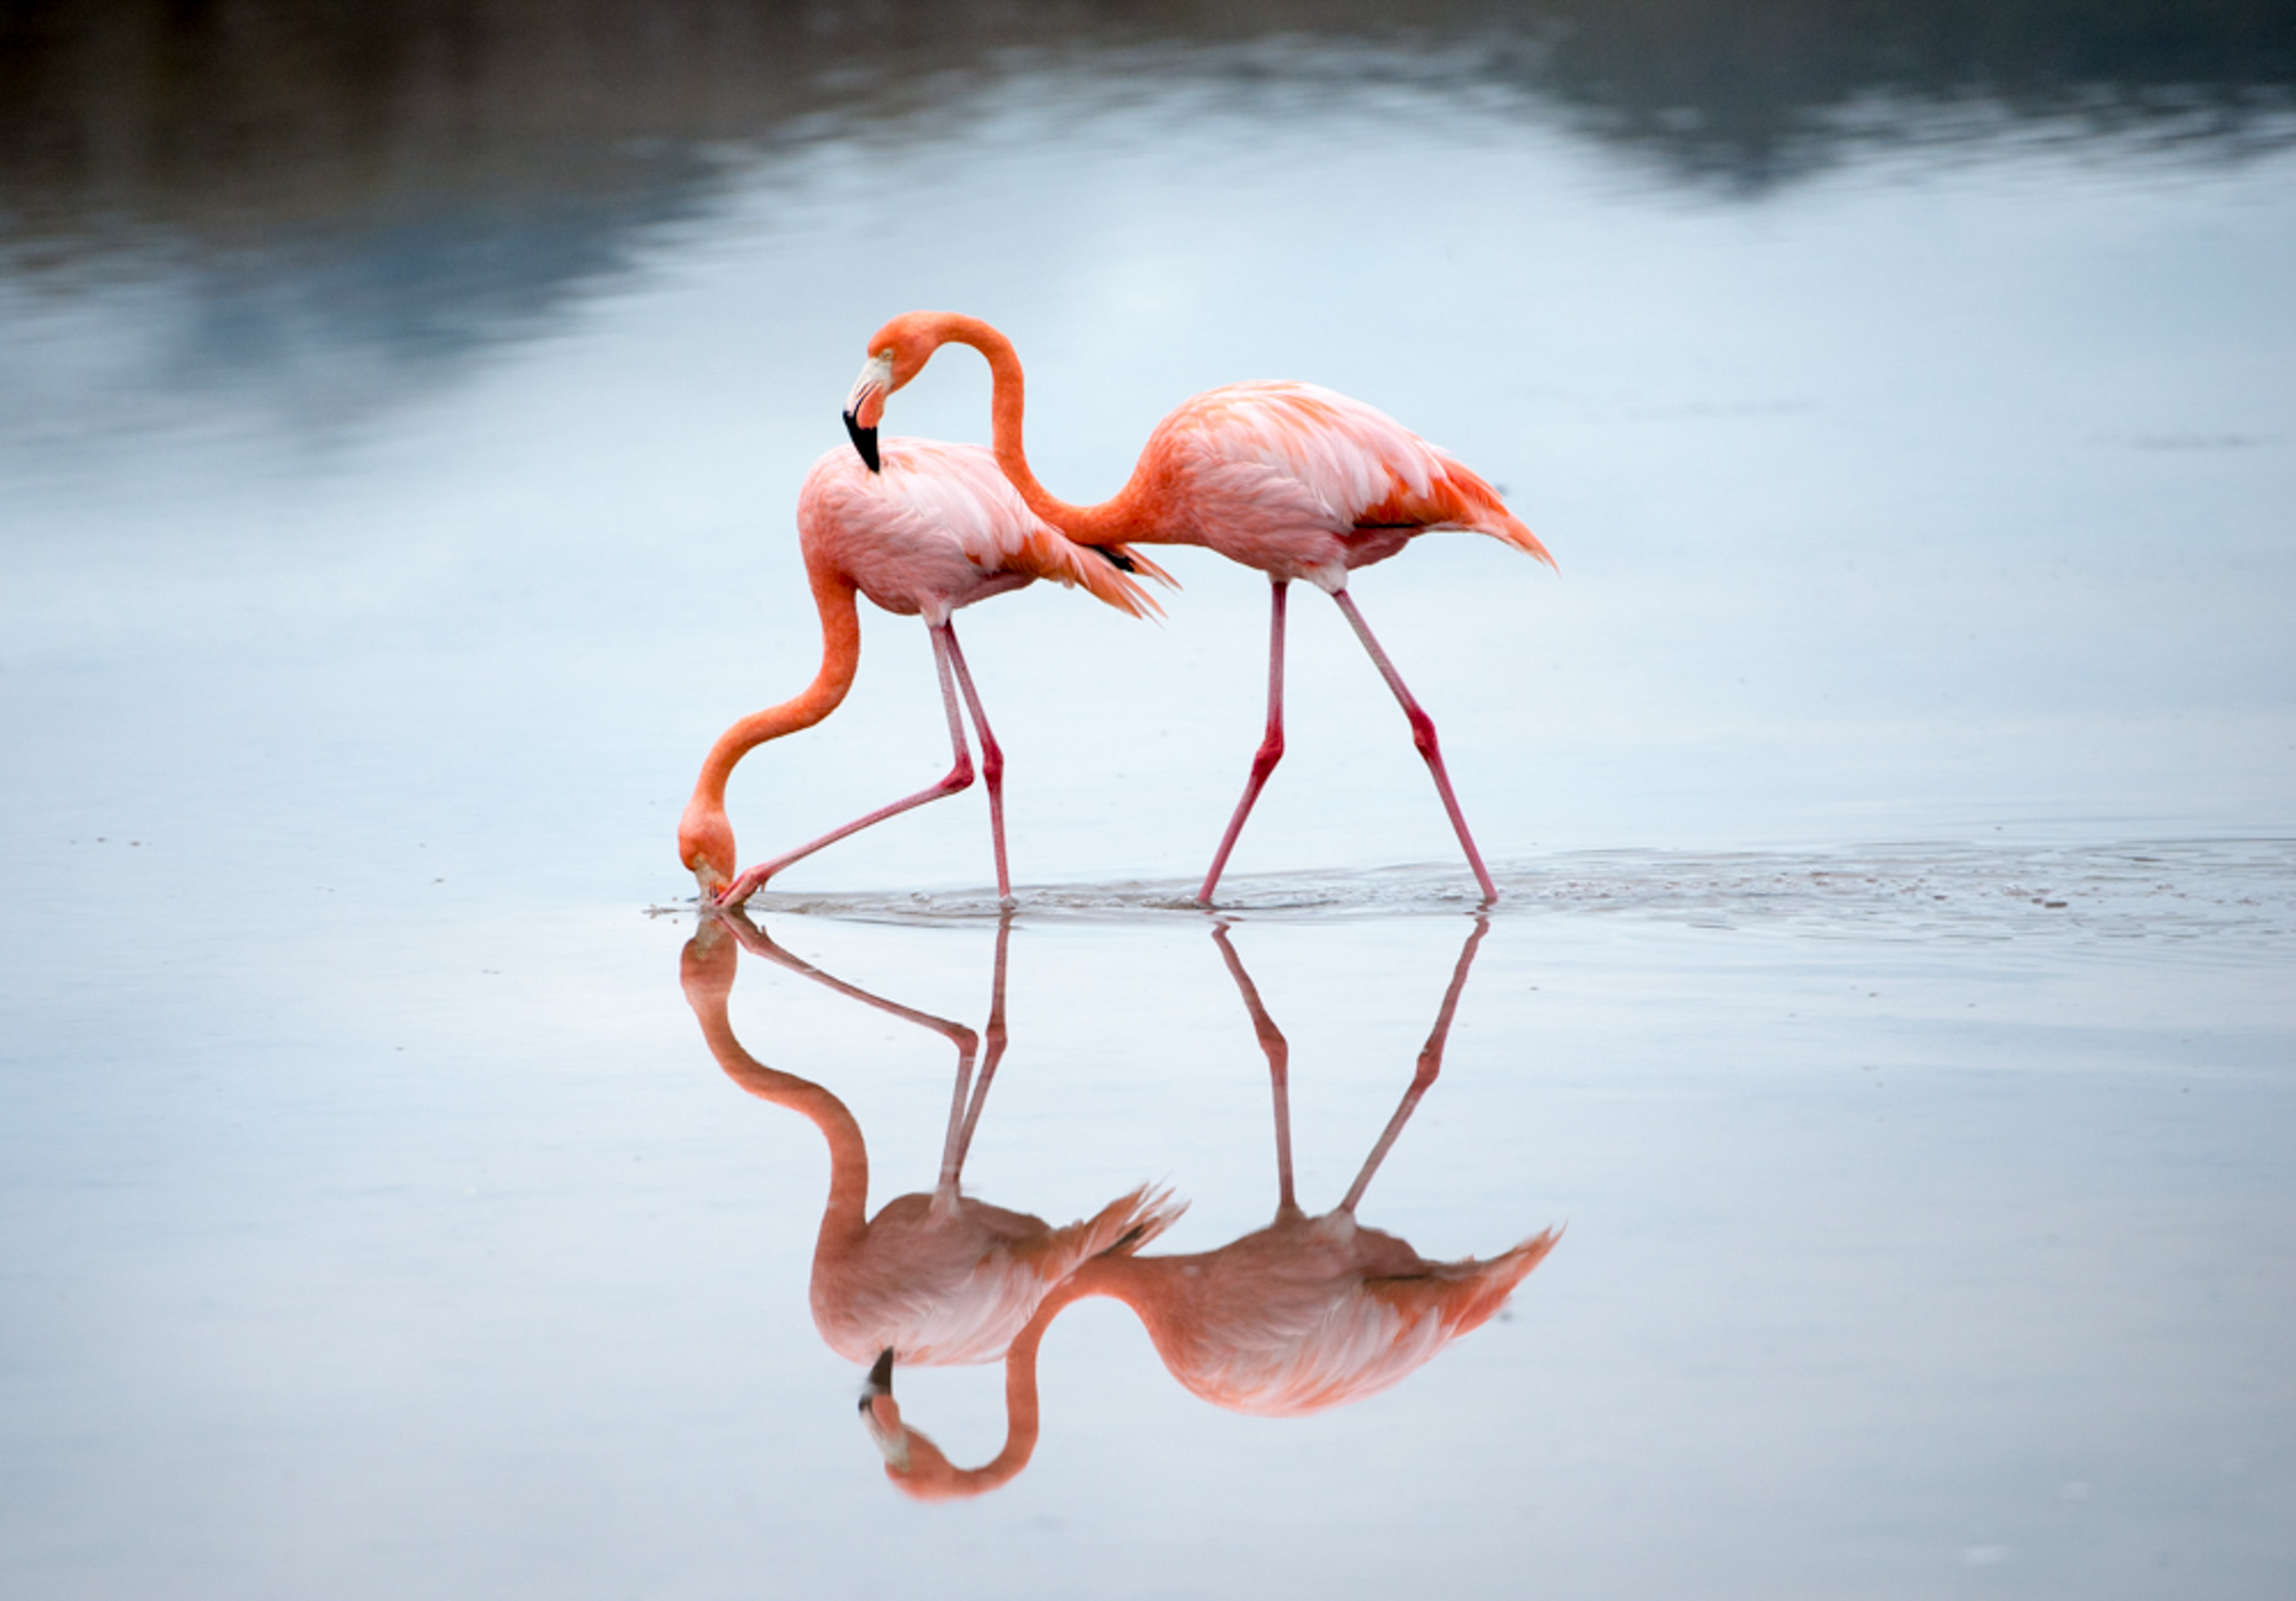 Two flamingos standing in shallow water with reflections.